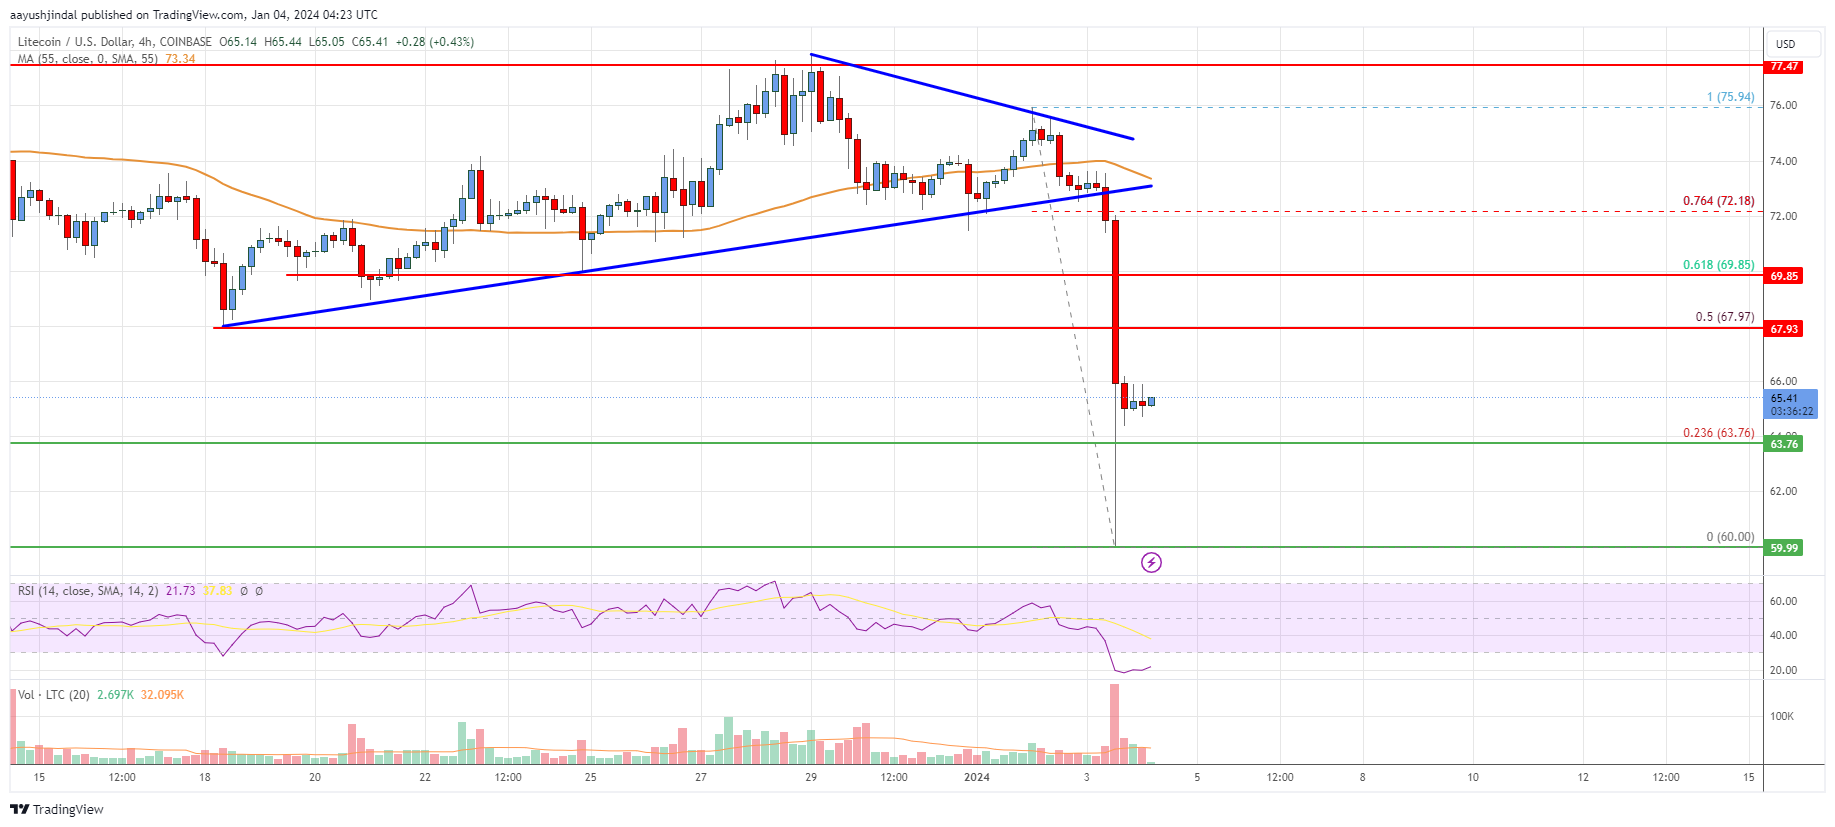 Litecoin (LTC) Price Analysis: Can Bulls Protect This Uptrend Support